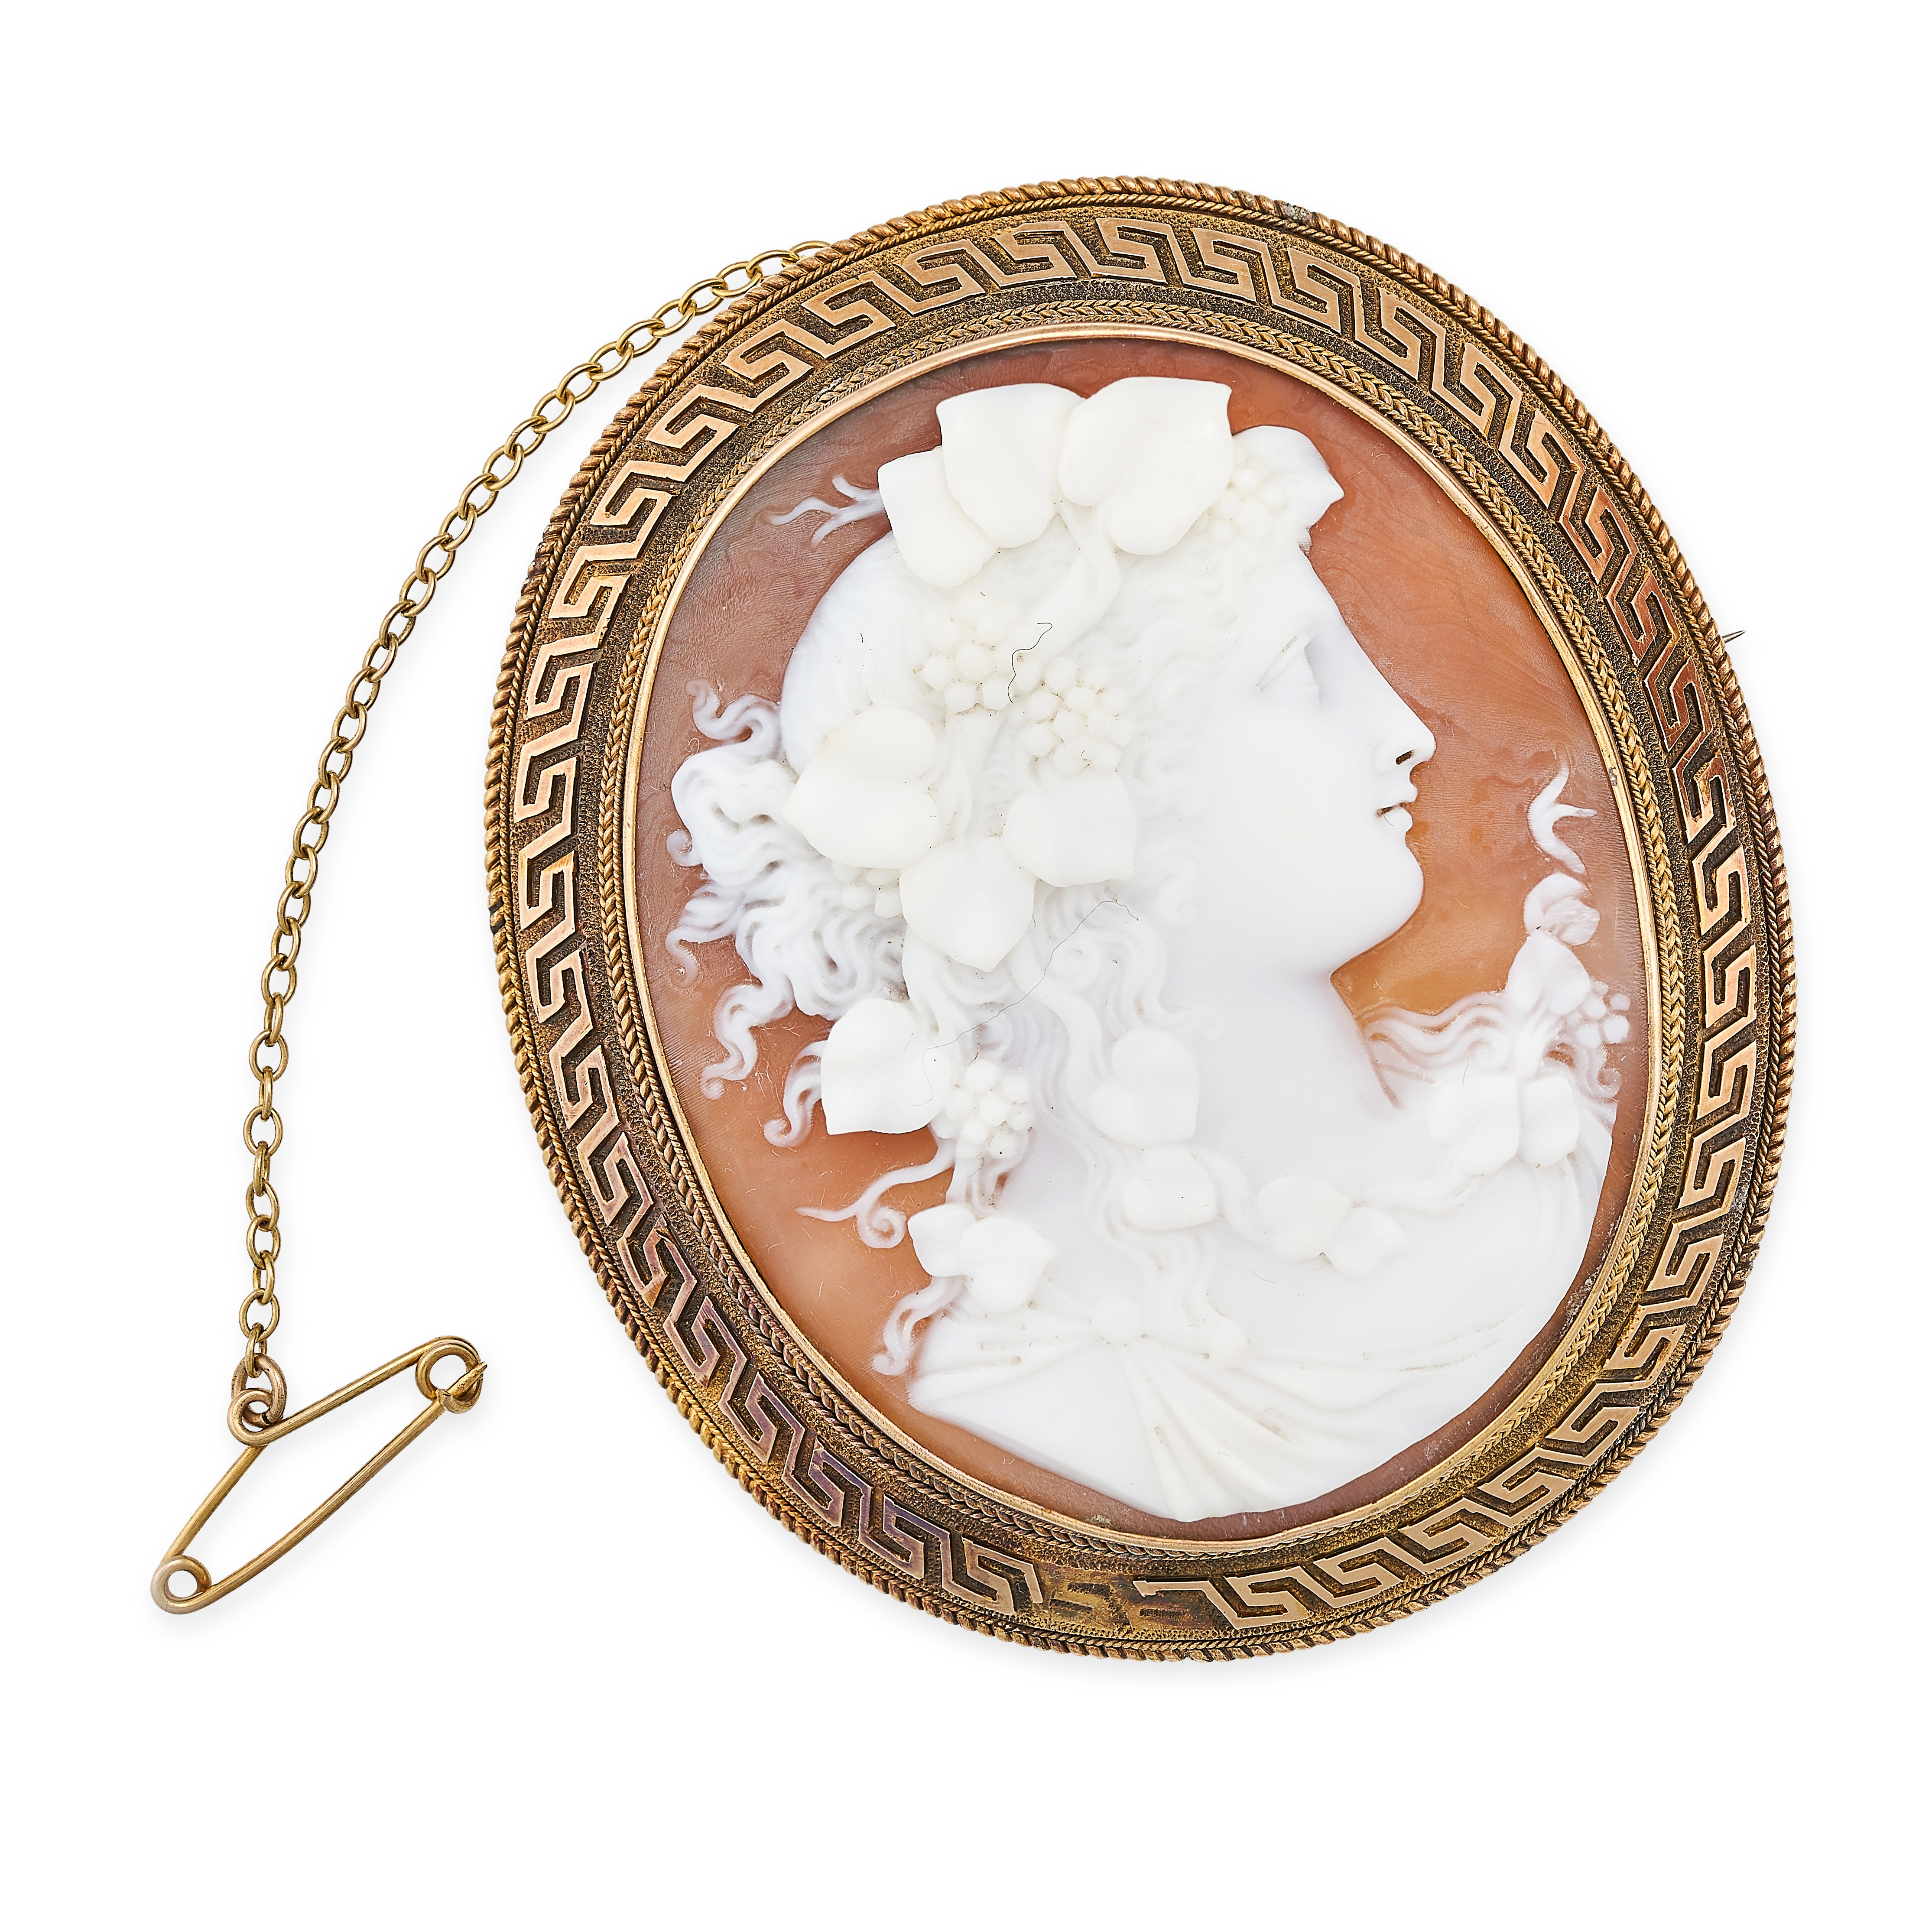 AN ANTIQUE VICTORIAN SHELL CAMEO BROOCH, 19TH CENTURY in yellow gold, set with a shell cameo depi...